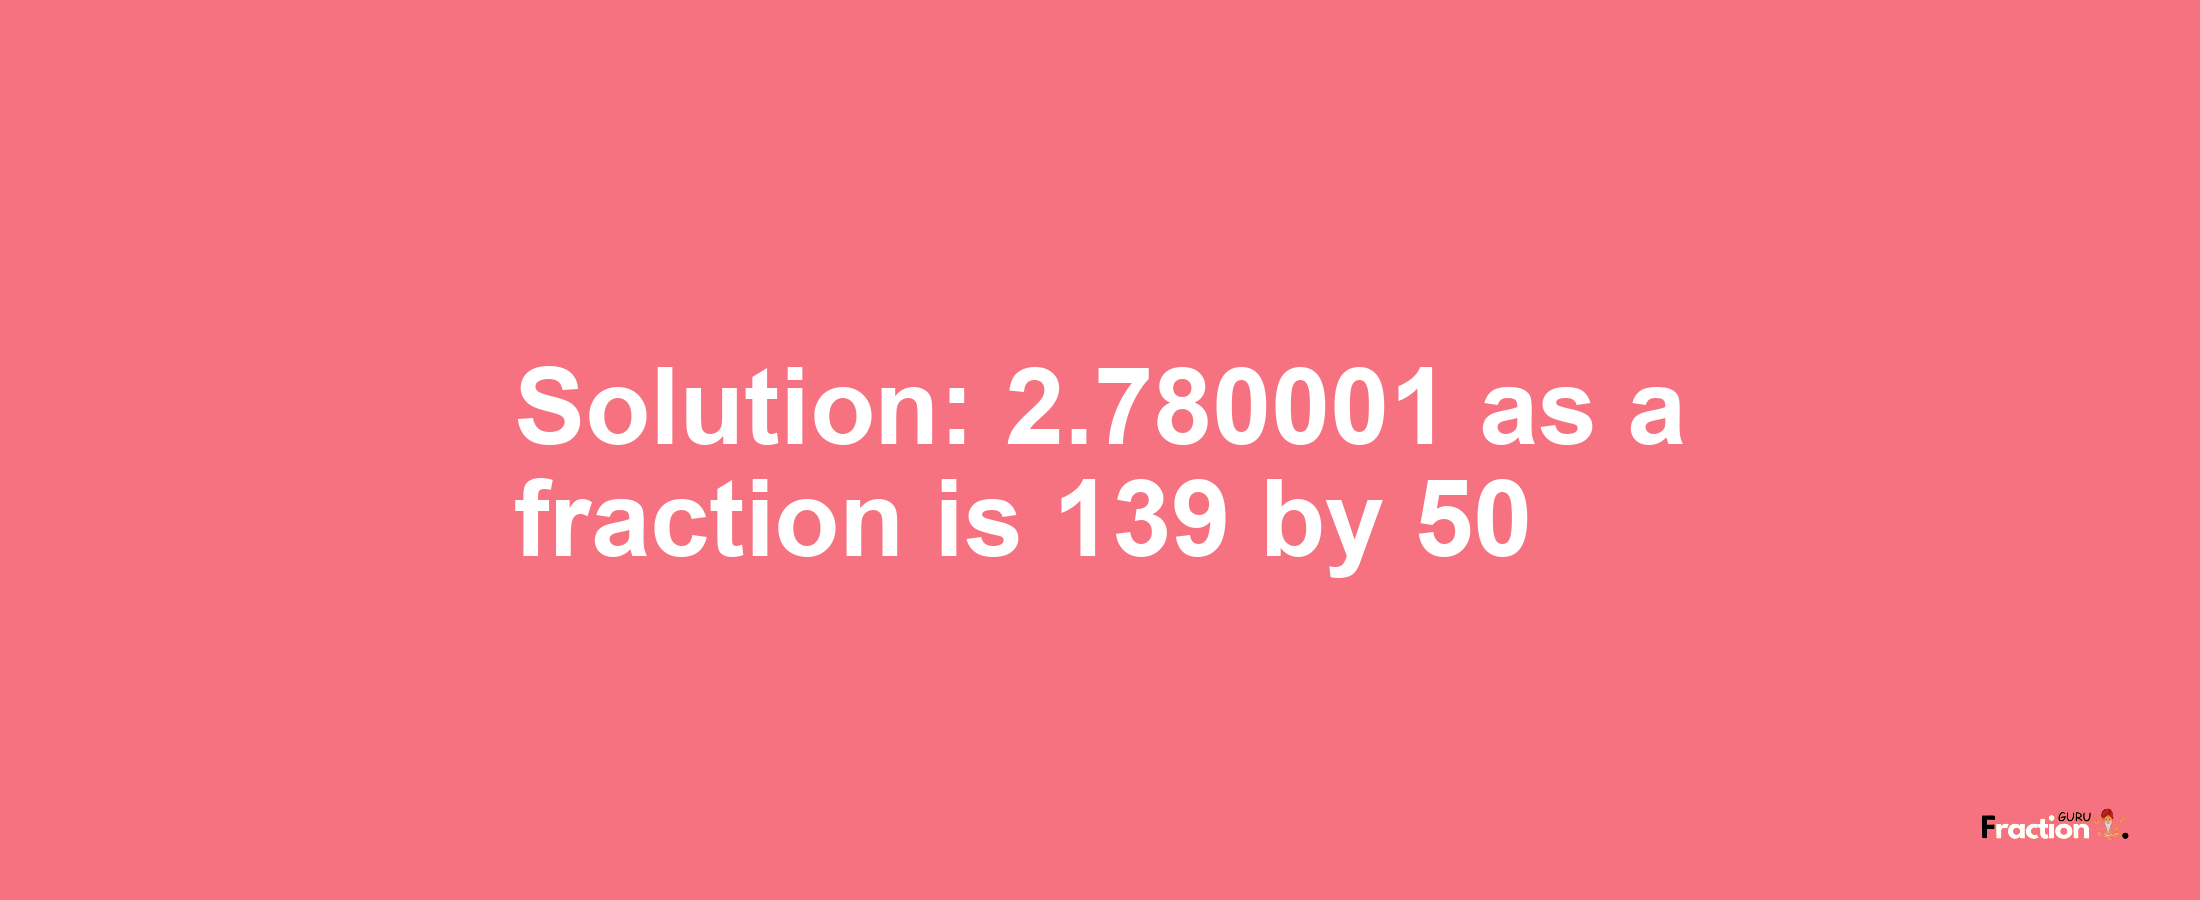 Solution:2.780001 as a fraction is 139/50